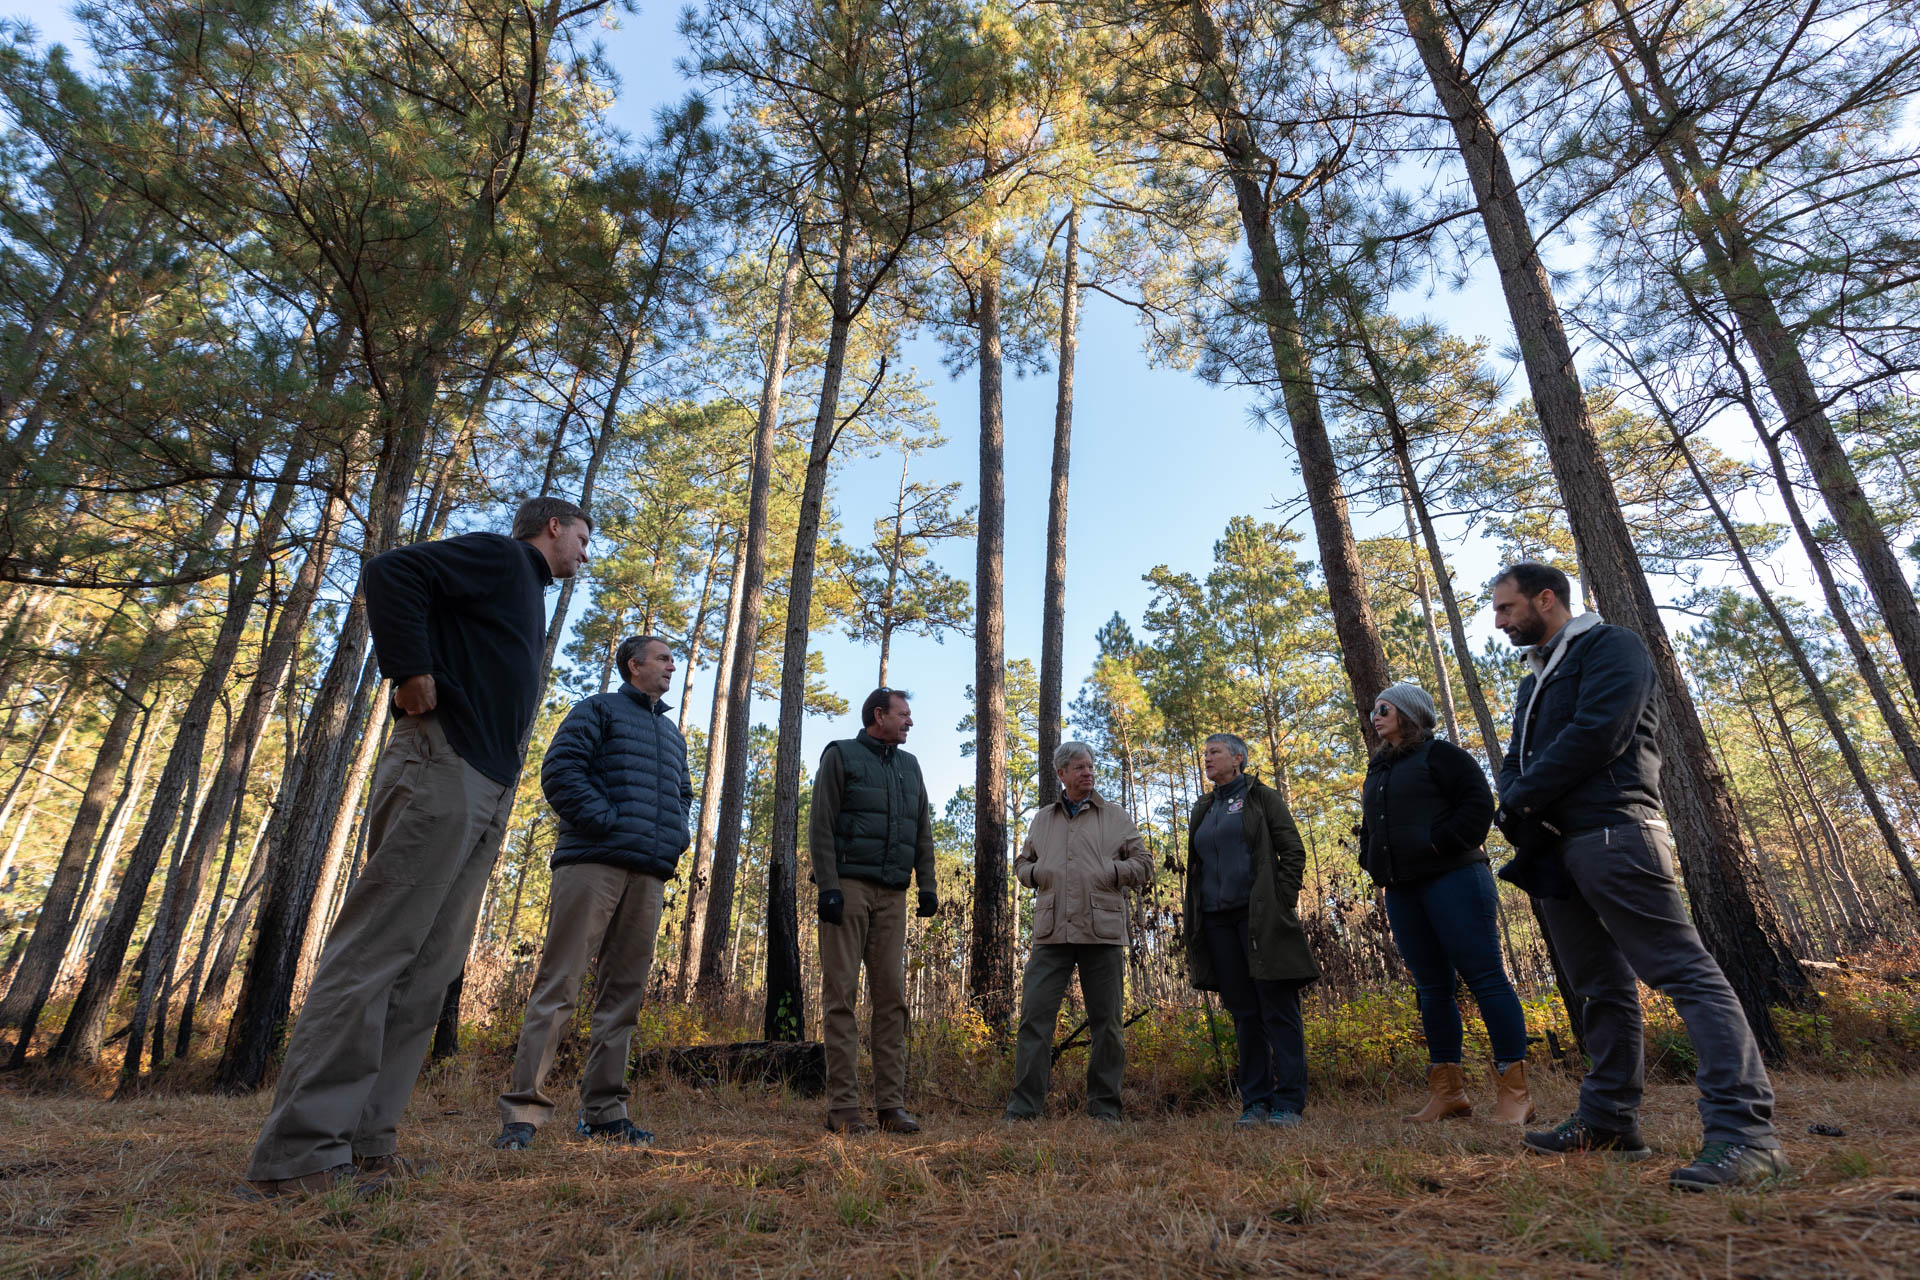 Tour of the Piney Groves Flatwood Natural Area Preserve